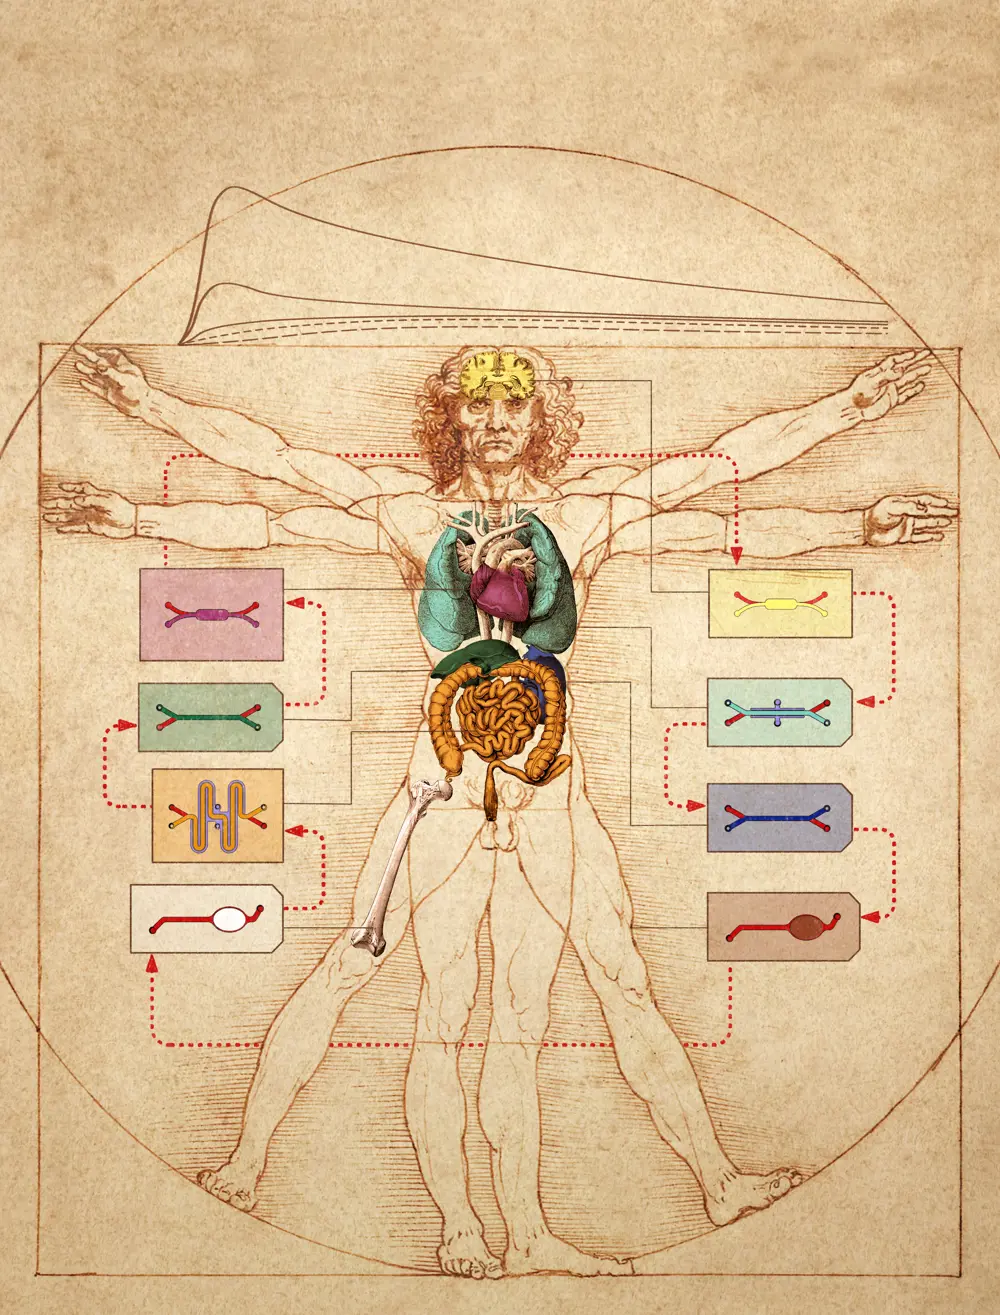 A sketch resembling Da Vinci's Vitruvian Man, with diagrams of each of the different organ on a chip technologies that could medically represent different body parts.